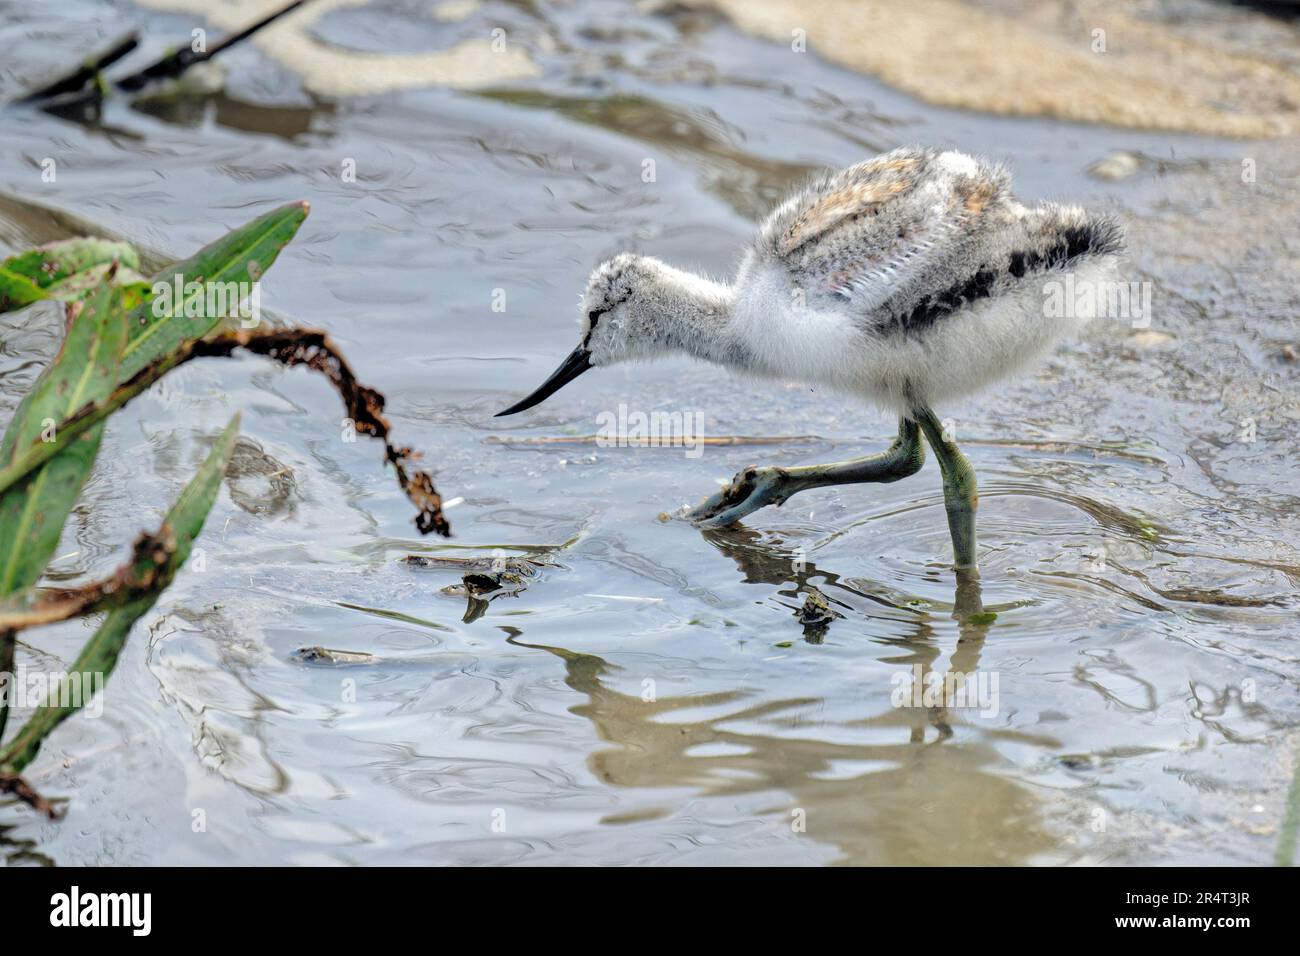 A Fluffy Avocet Chick ventures onto the mudflats Stock Photo